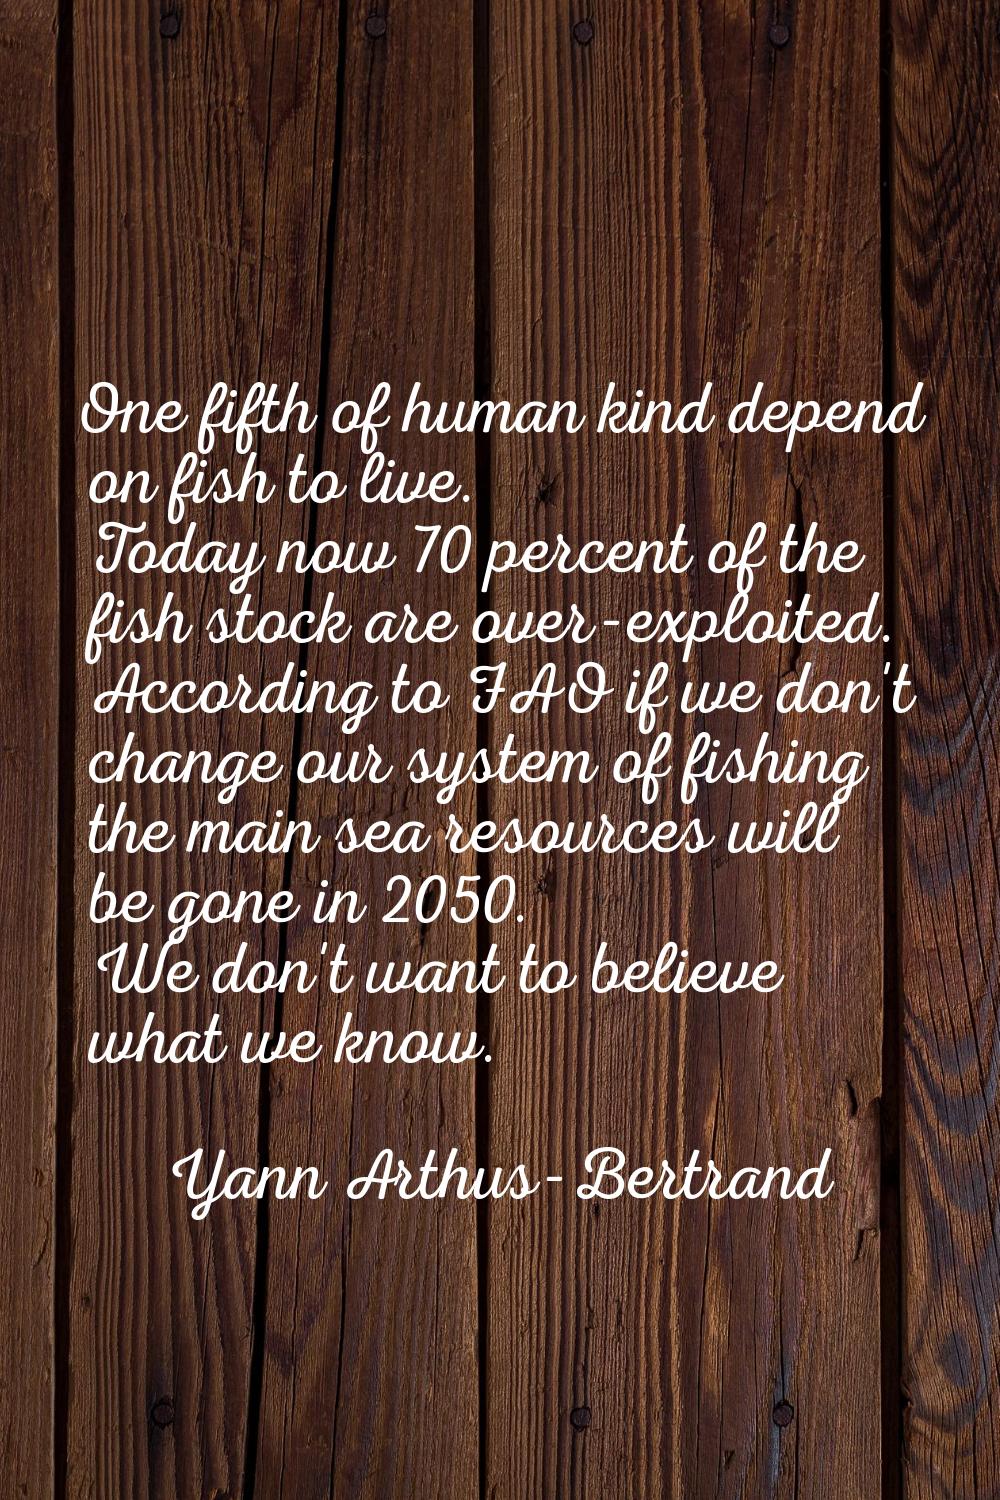 One fifth of human kind depend on fish to live. Today now 70 percent of the fish stock are over-exp